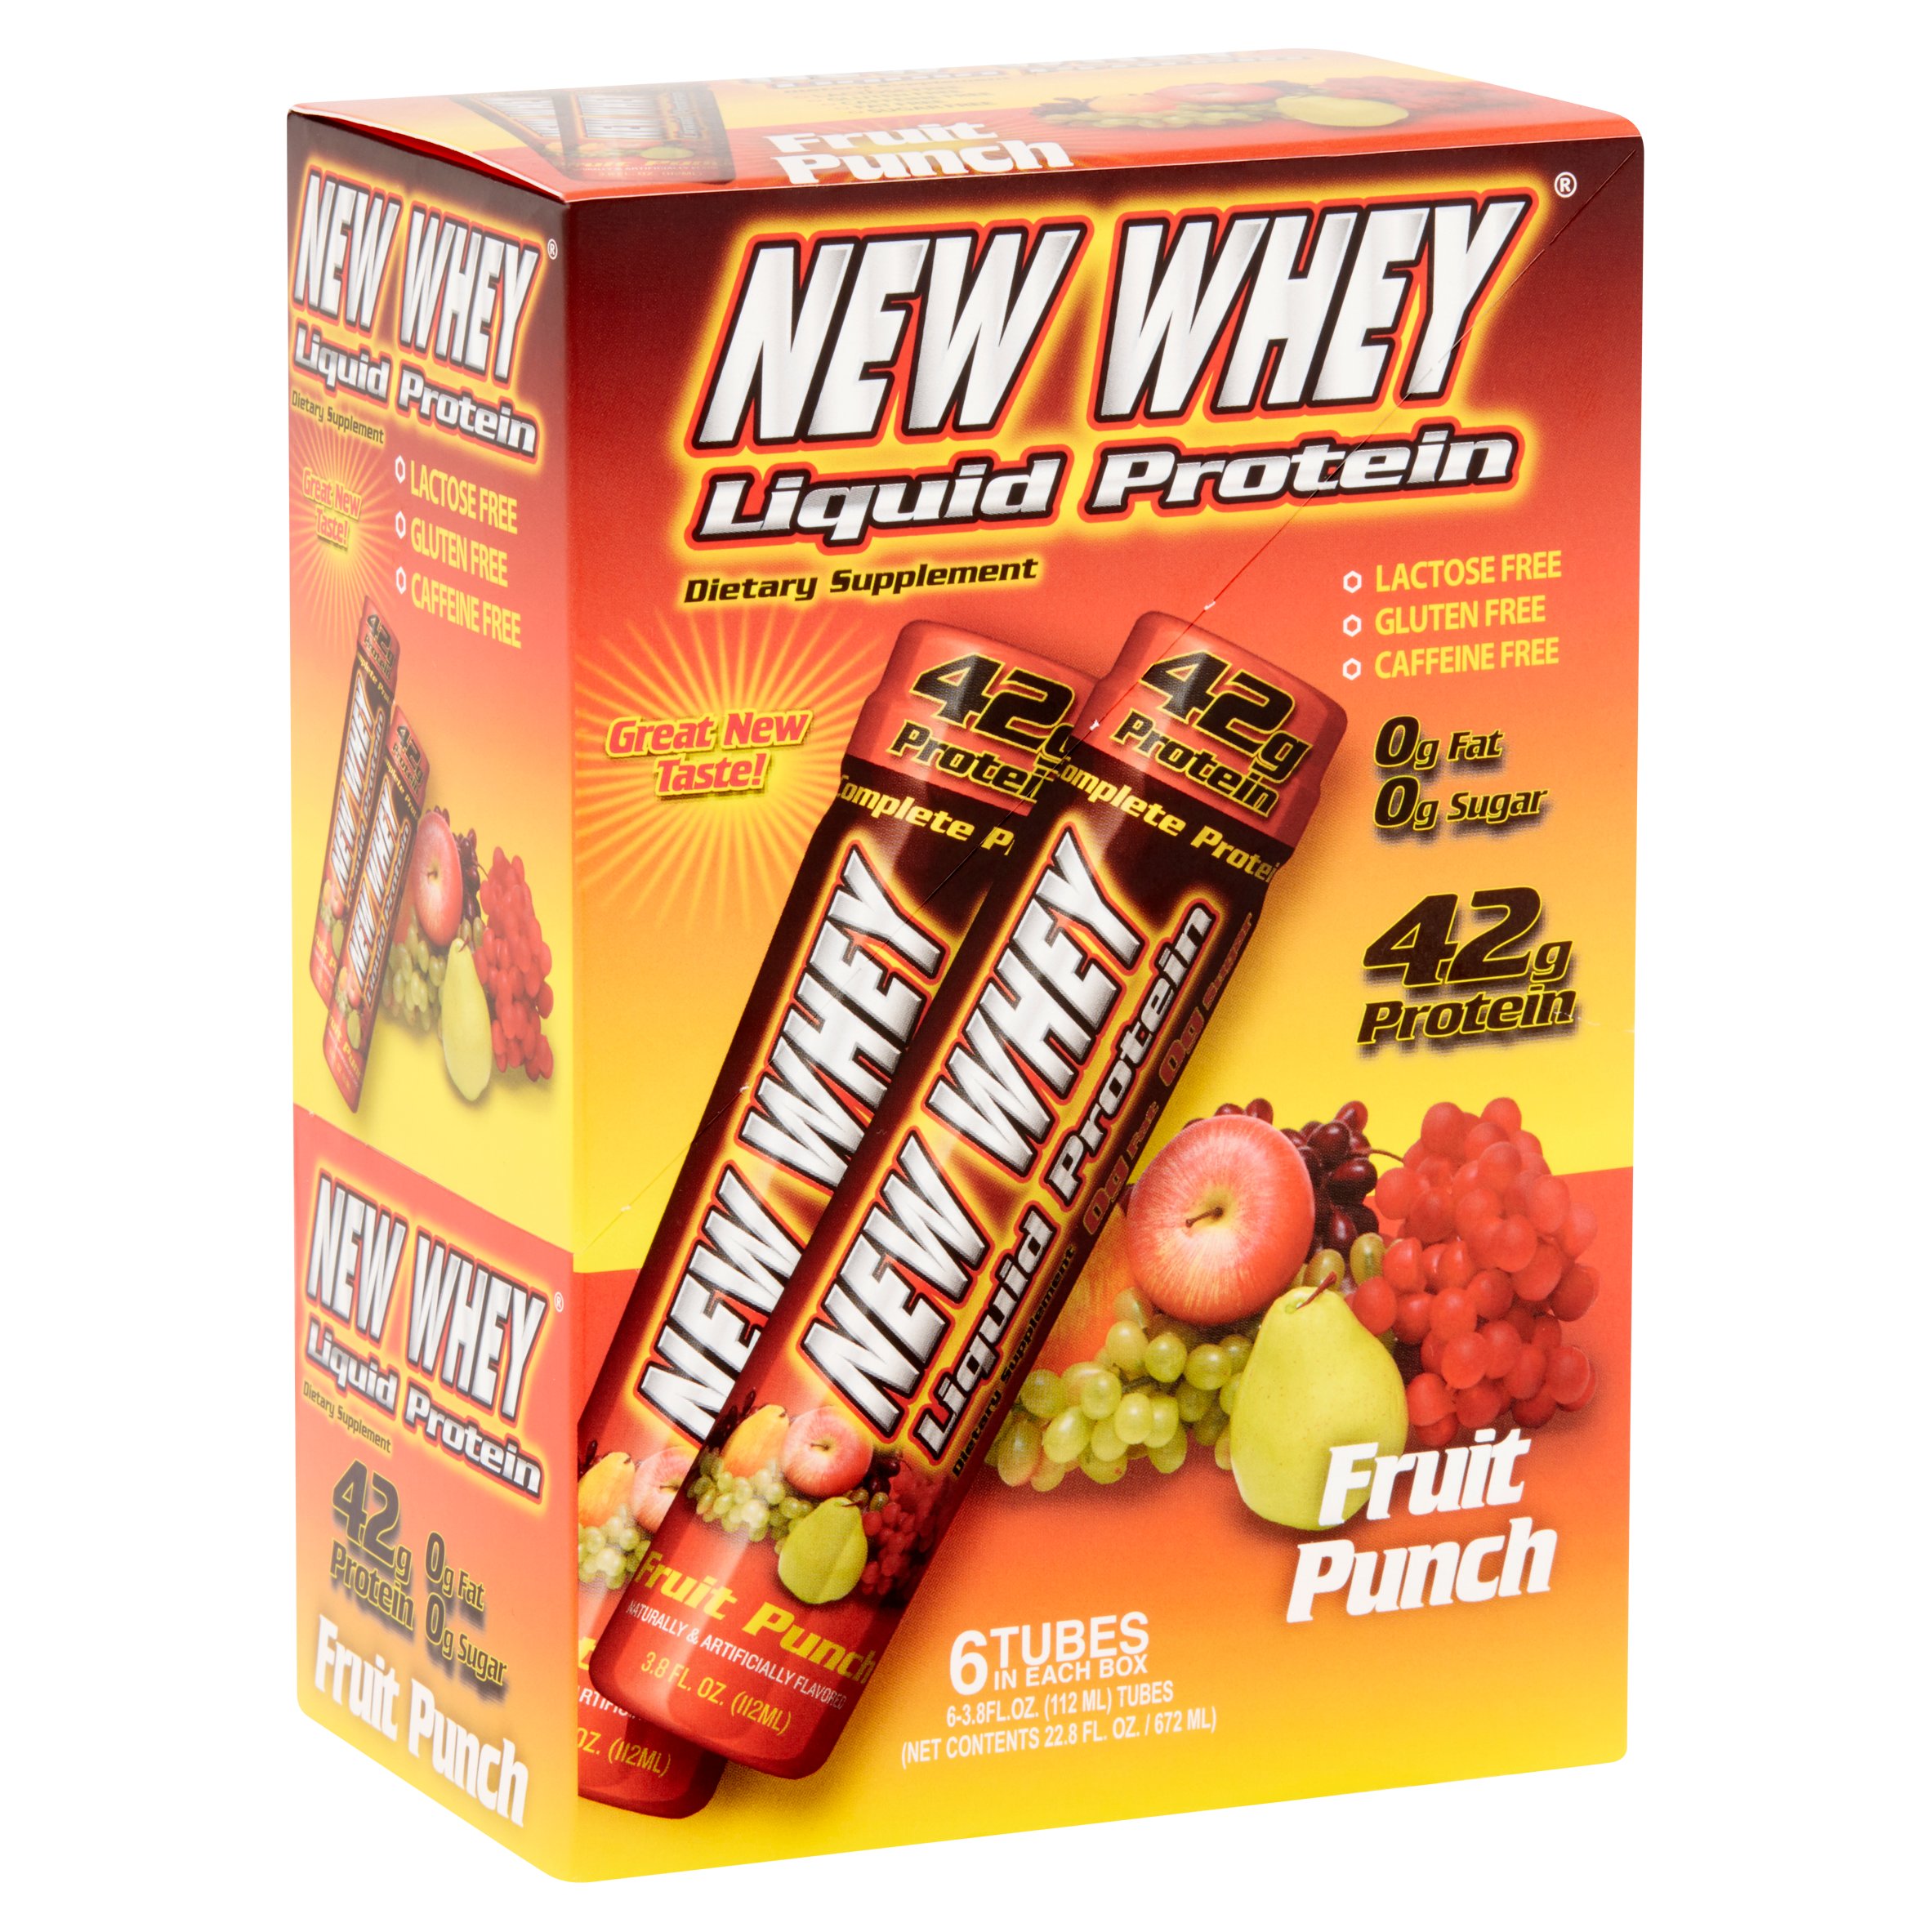 New Whey Protein Drink, 42 Grams of Protein, Fruit Punch, 3.8 Oz, 6 Ct - image 2 of 5